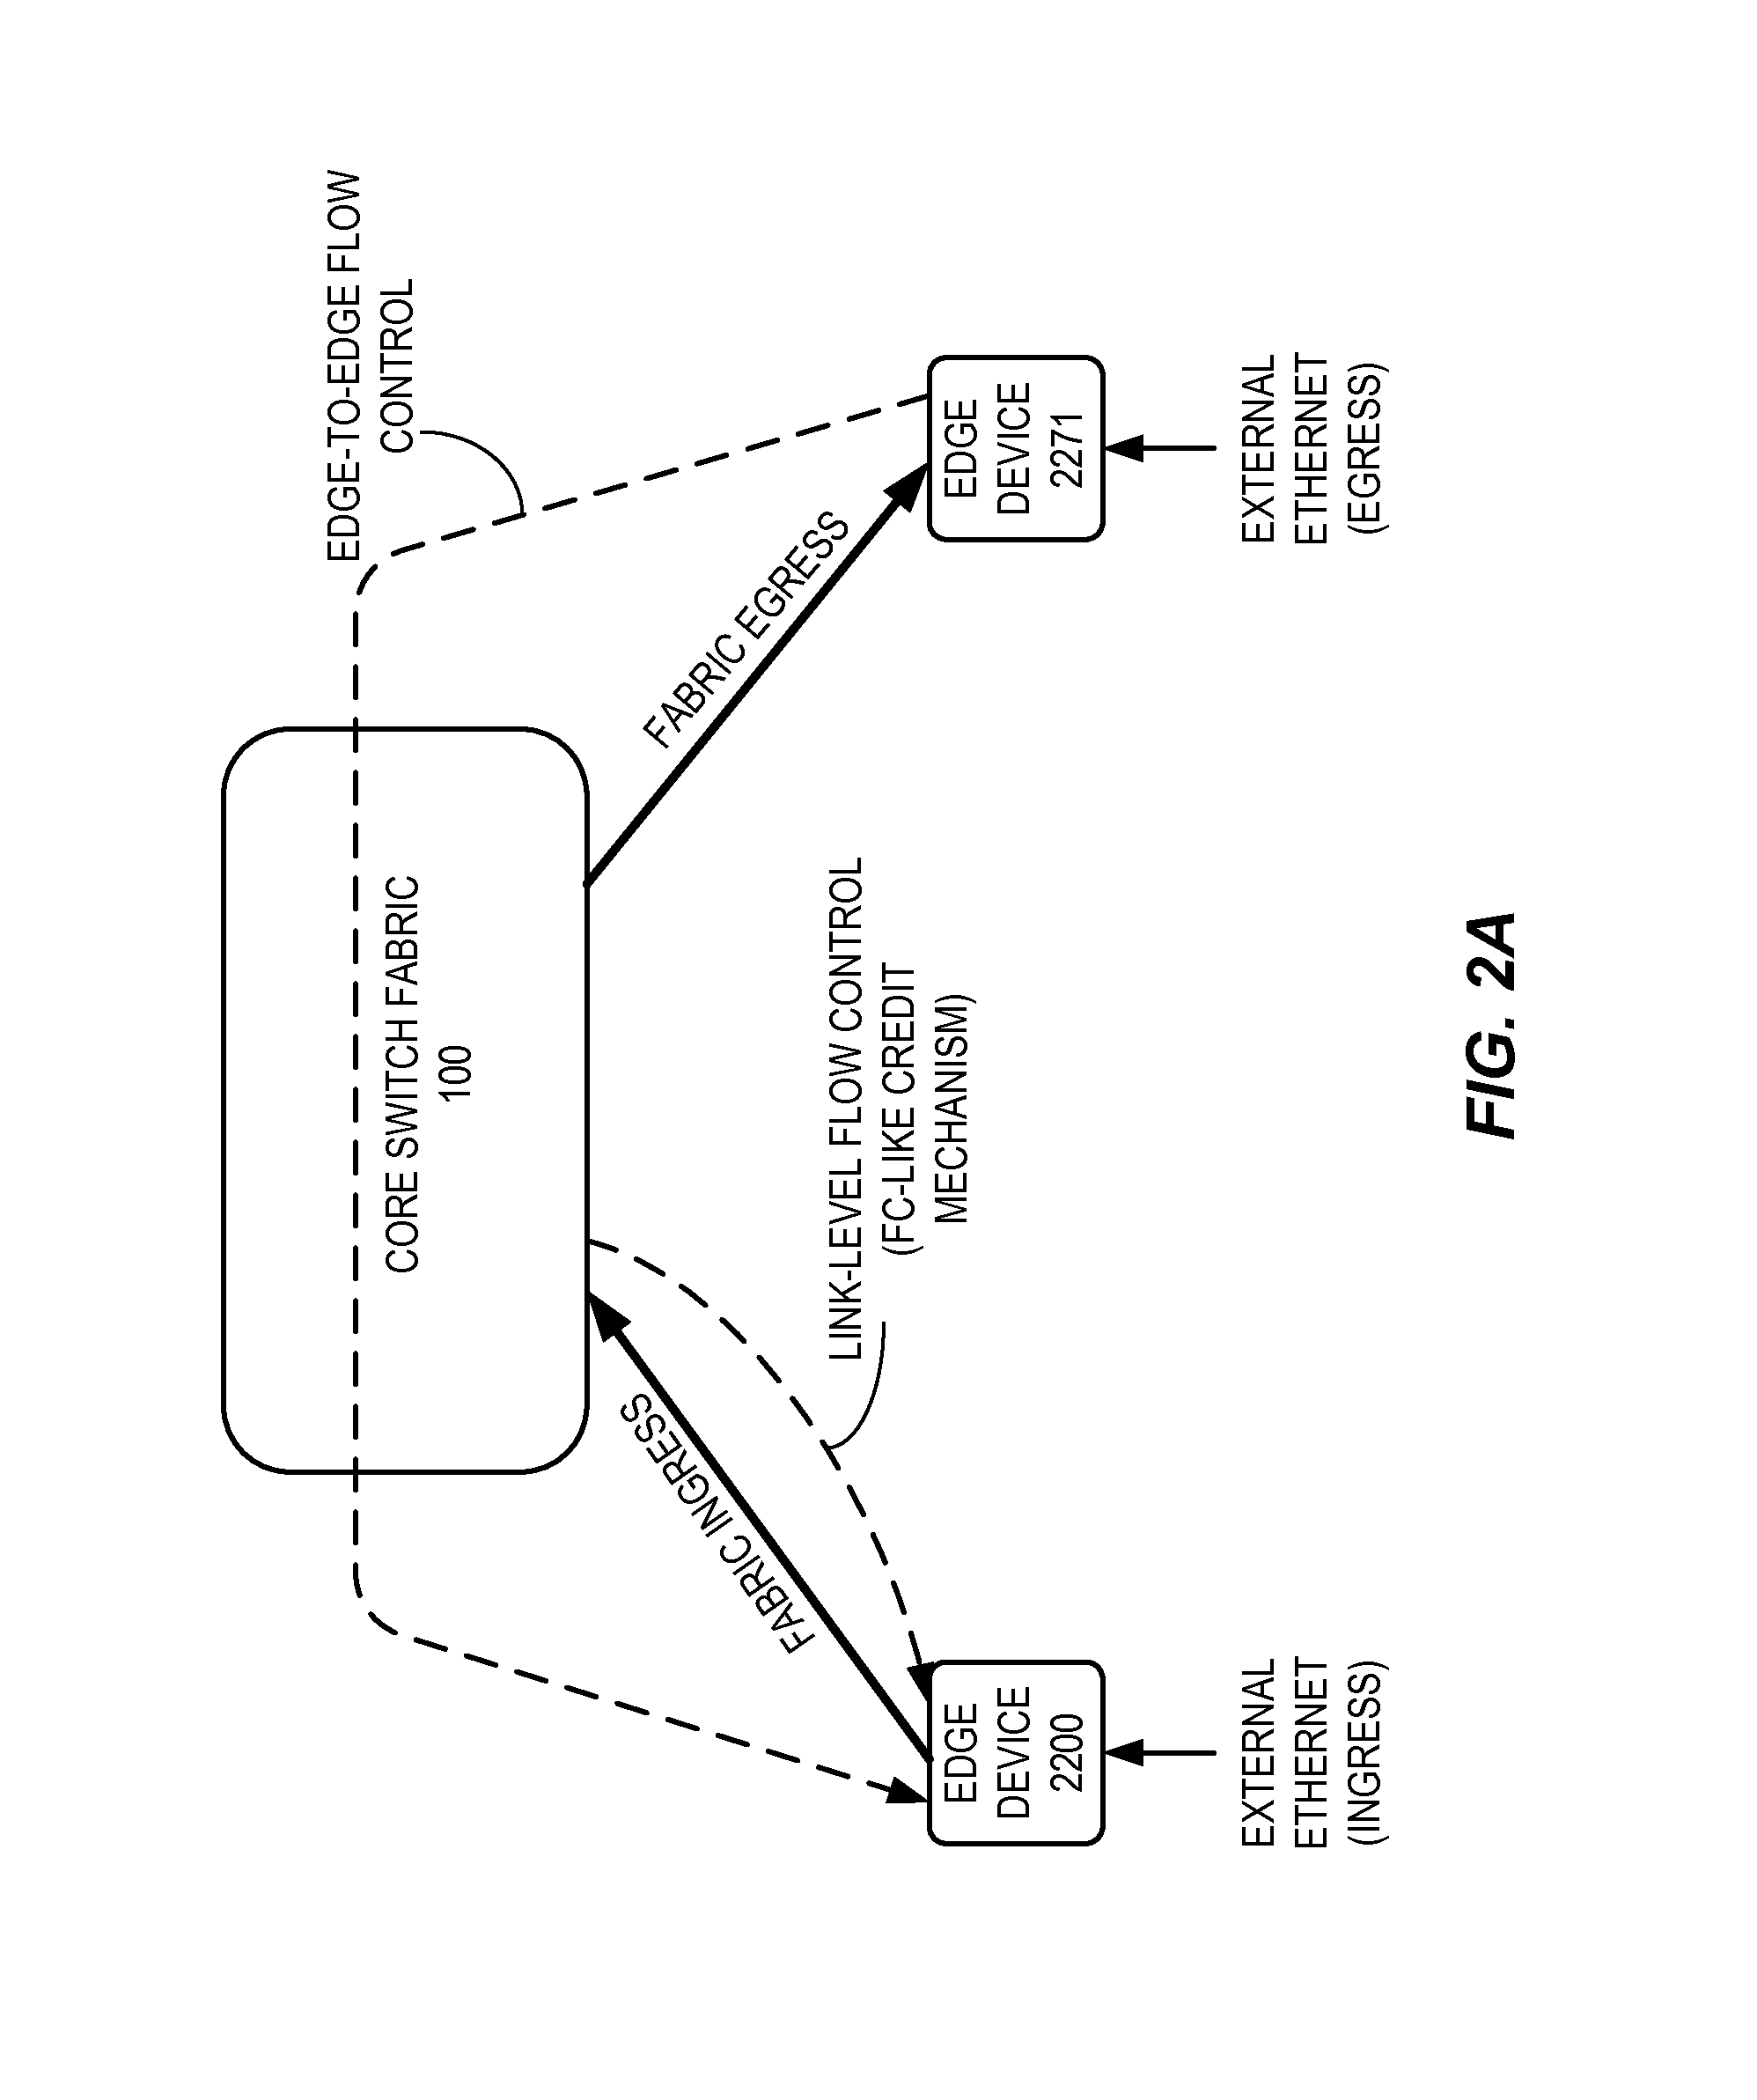 Multi-path switching with edge-to-edge flow control